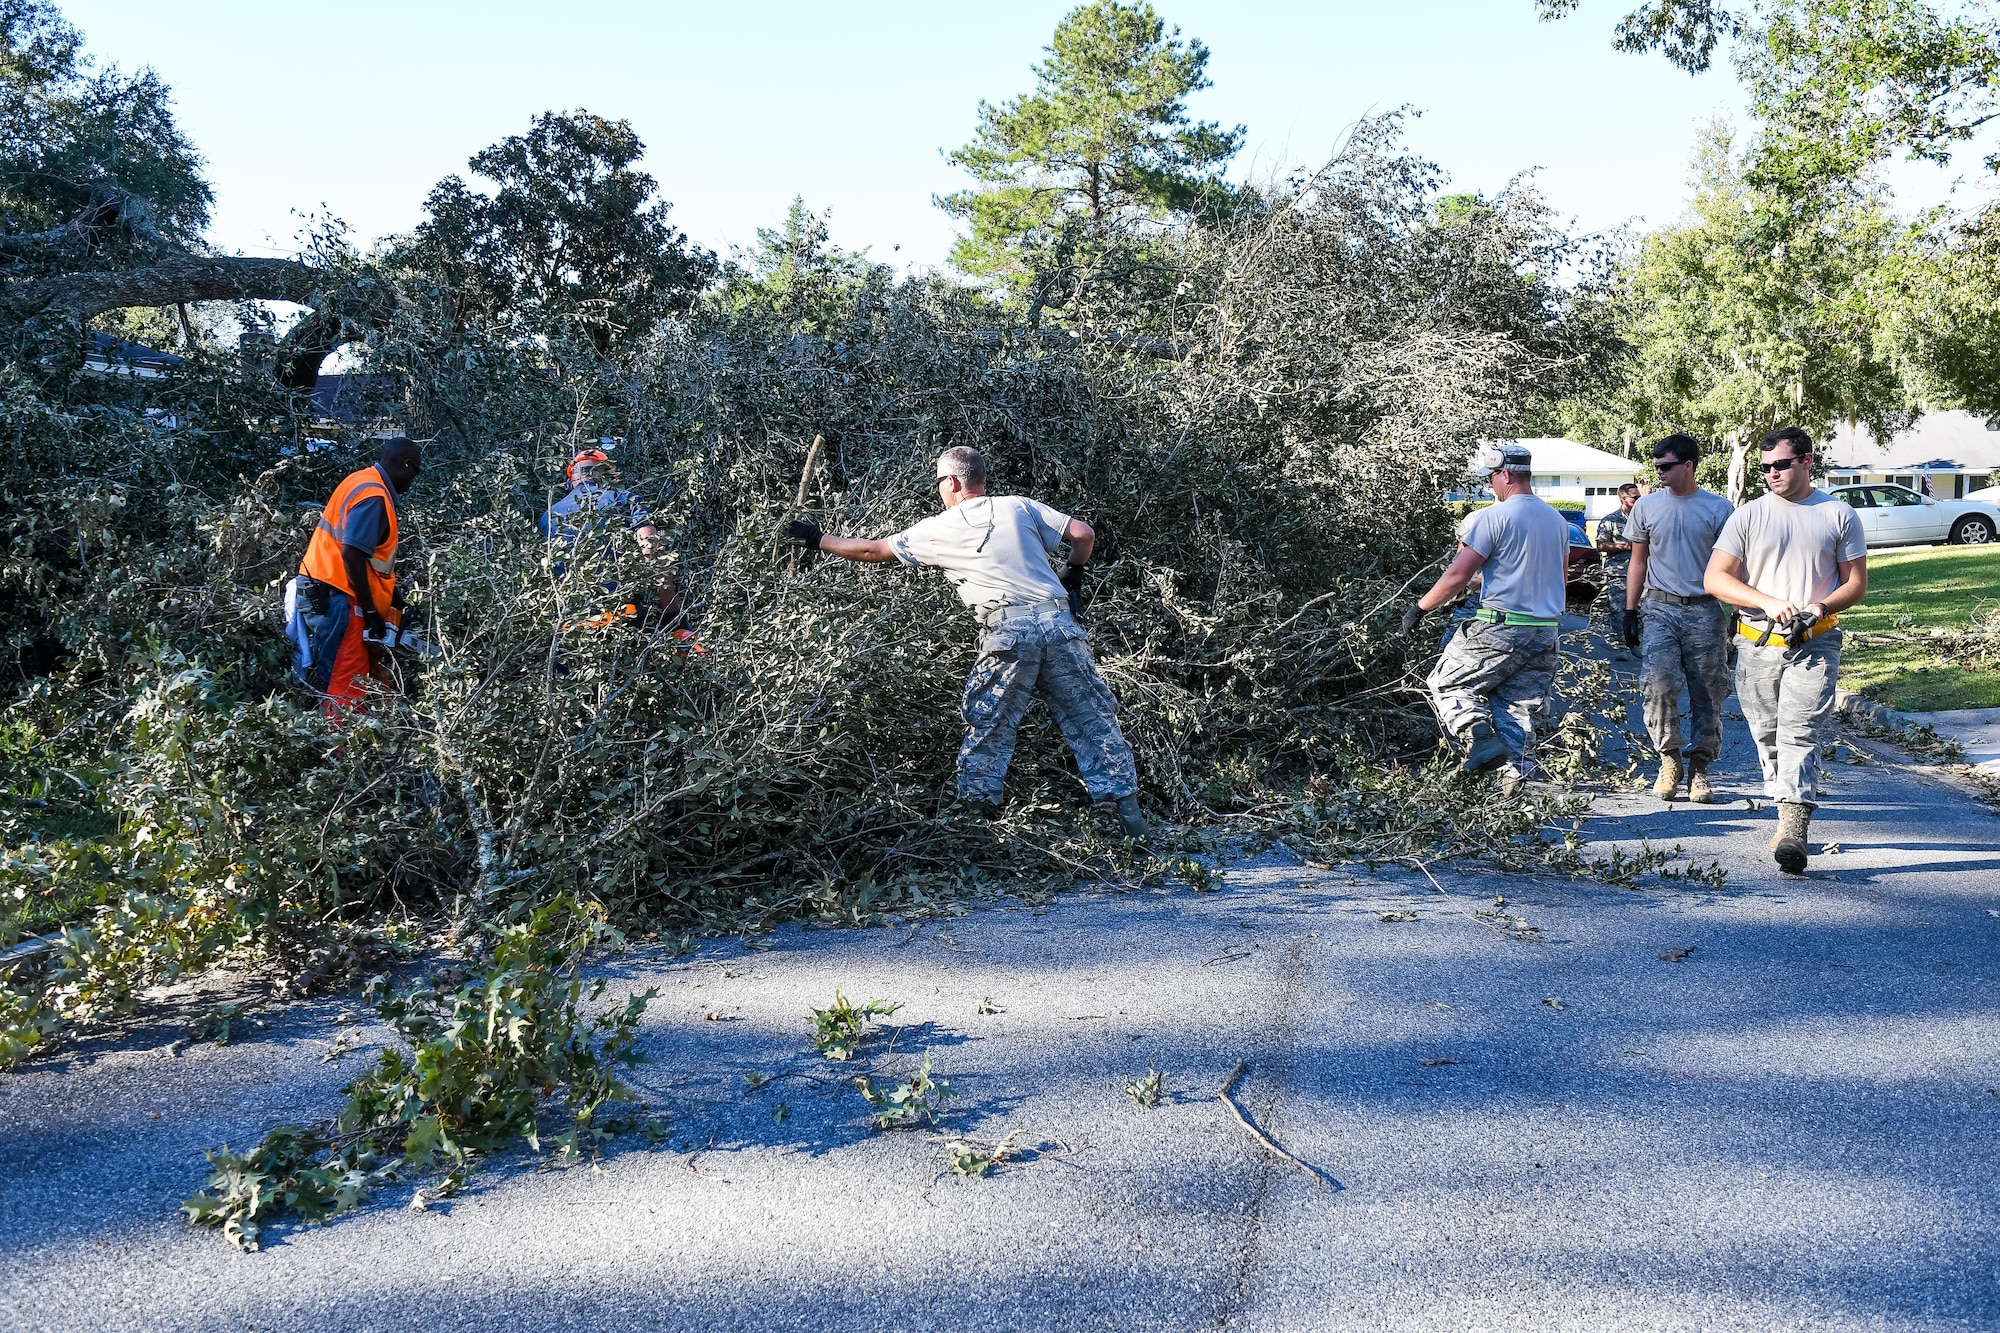 Citizen Airmen from the 116th Air Control Wing (ACW), Georgia Air National Guard, along with workers from Chatham County Public Works, clear fallen trees from roadways in the aftermath of Hurricane Matthew, Savannah, Ga., Oct. 9, 2016. The Airmen from the 116th ACW deployed to Savannah to support civil authorities, are working along side the Chatham County Public Works department to assist in road clearing and debris cleanup operations. (U.S. Air National Guard photo by Senior Master Sgt. Roger Parsons)